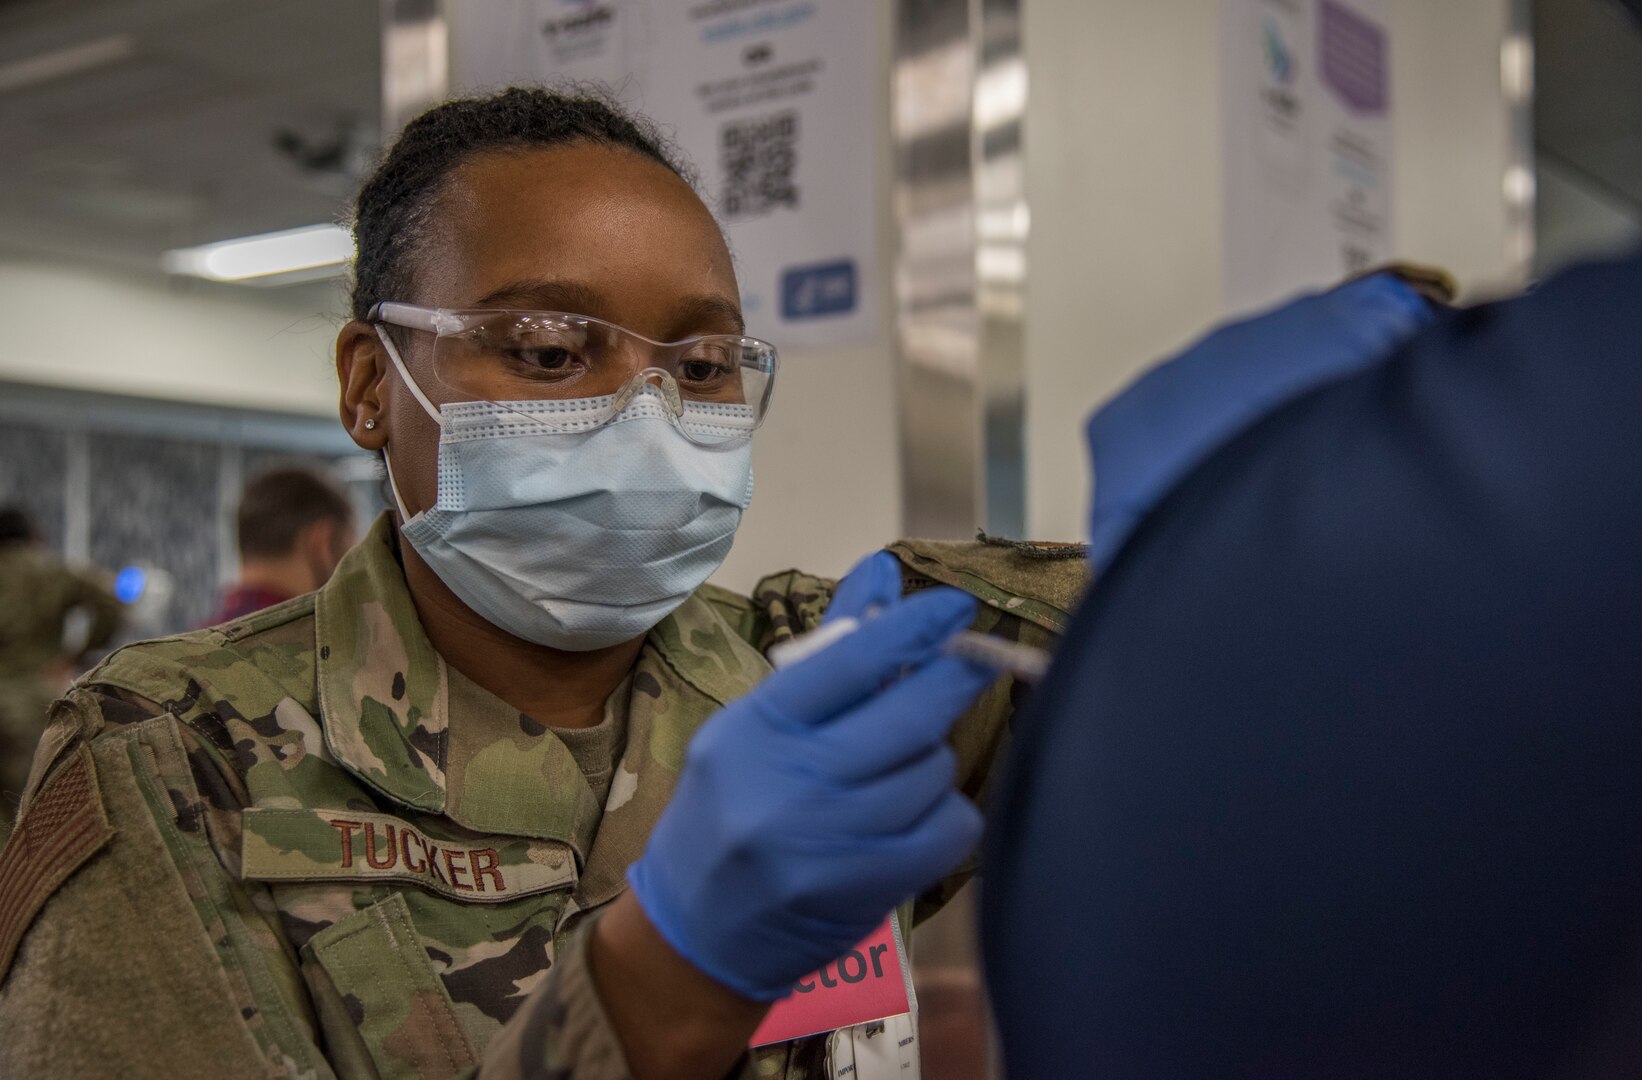 Since the arrival of the Pfizer vaccine to Wilford Hall Ambulatory Surgical Center on Dec. 14, 2020, more than 50 nurses and medical technicians have volunteered to administer the vaccine.